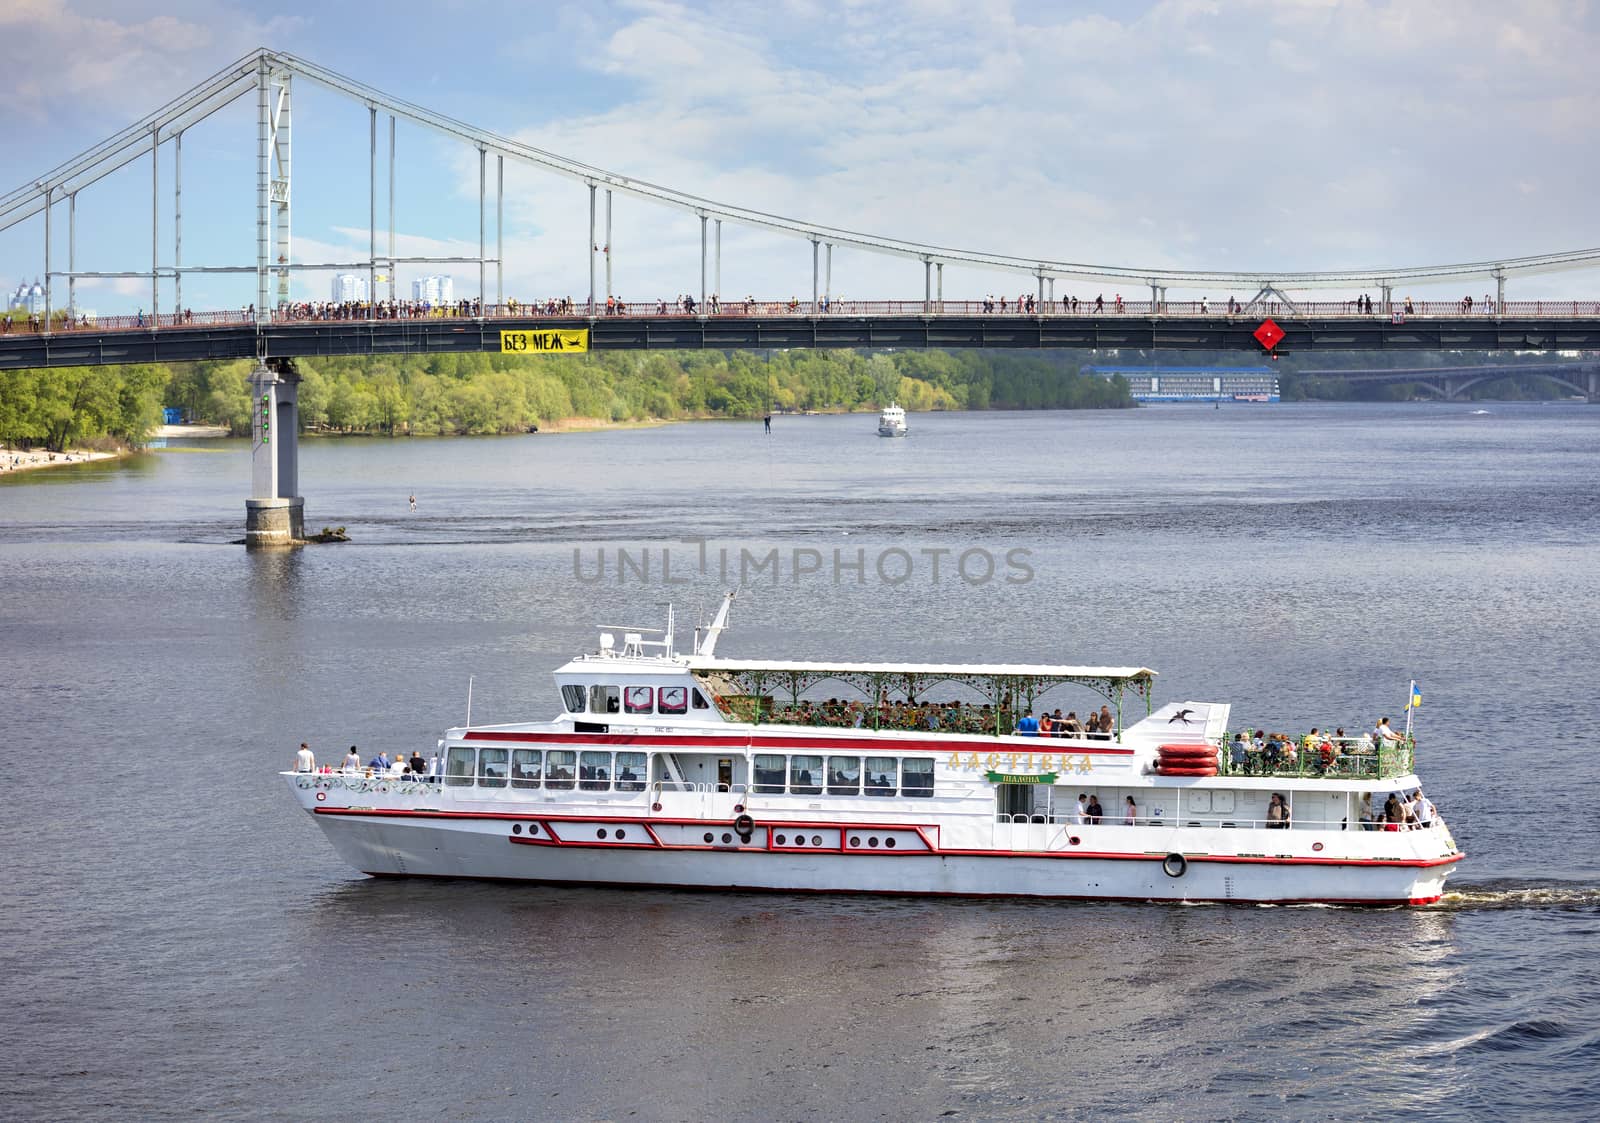 On a white pleasure boat, people rest on a bright summer day on the Dnieper River against the backdrop of the city park and the pedestrian bridge across the river in Kiev